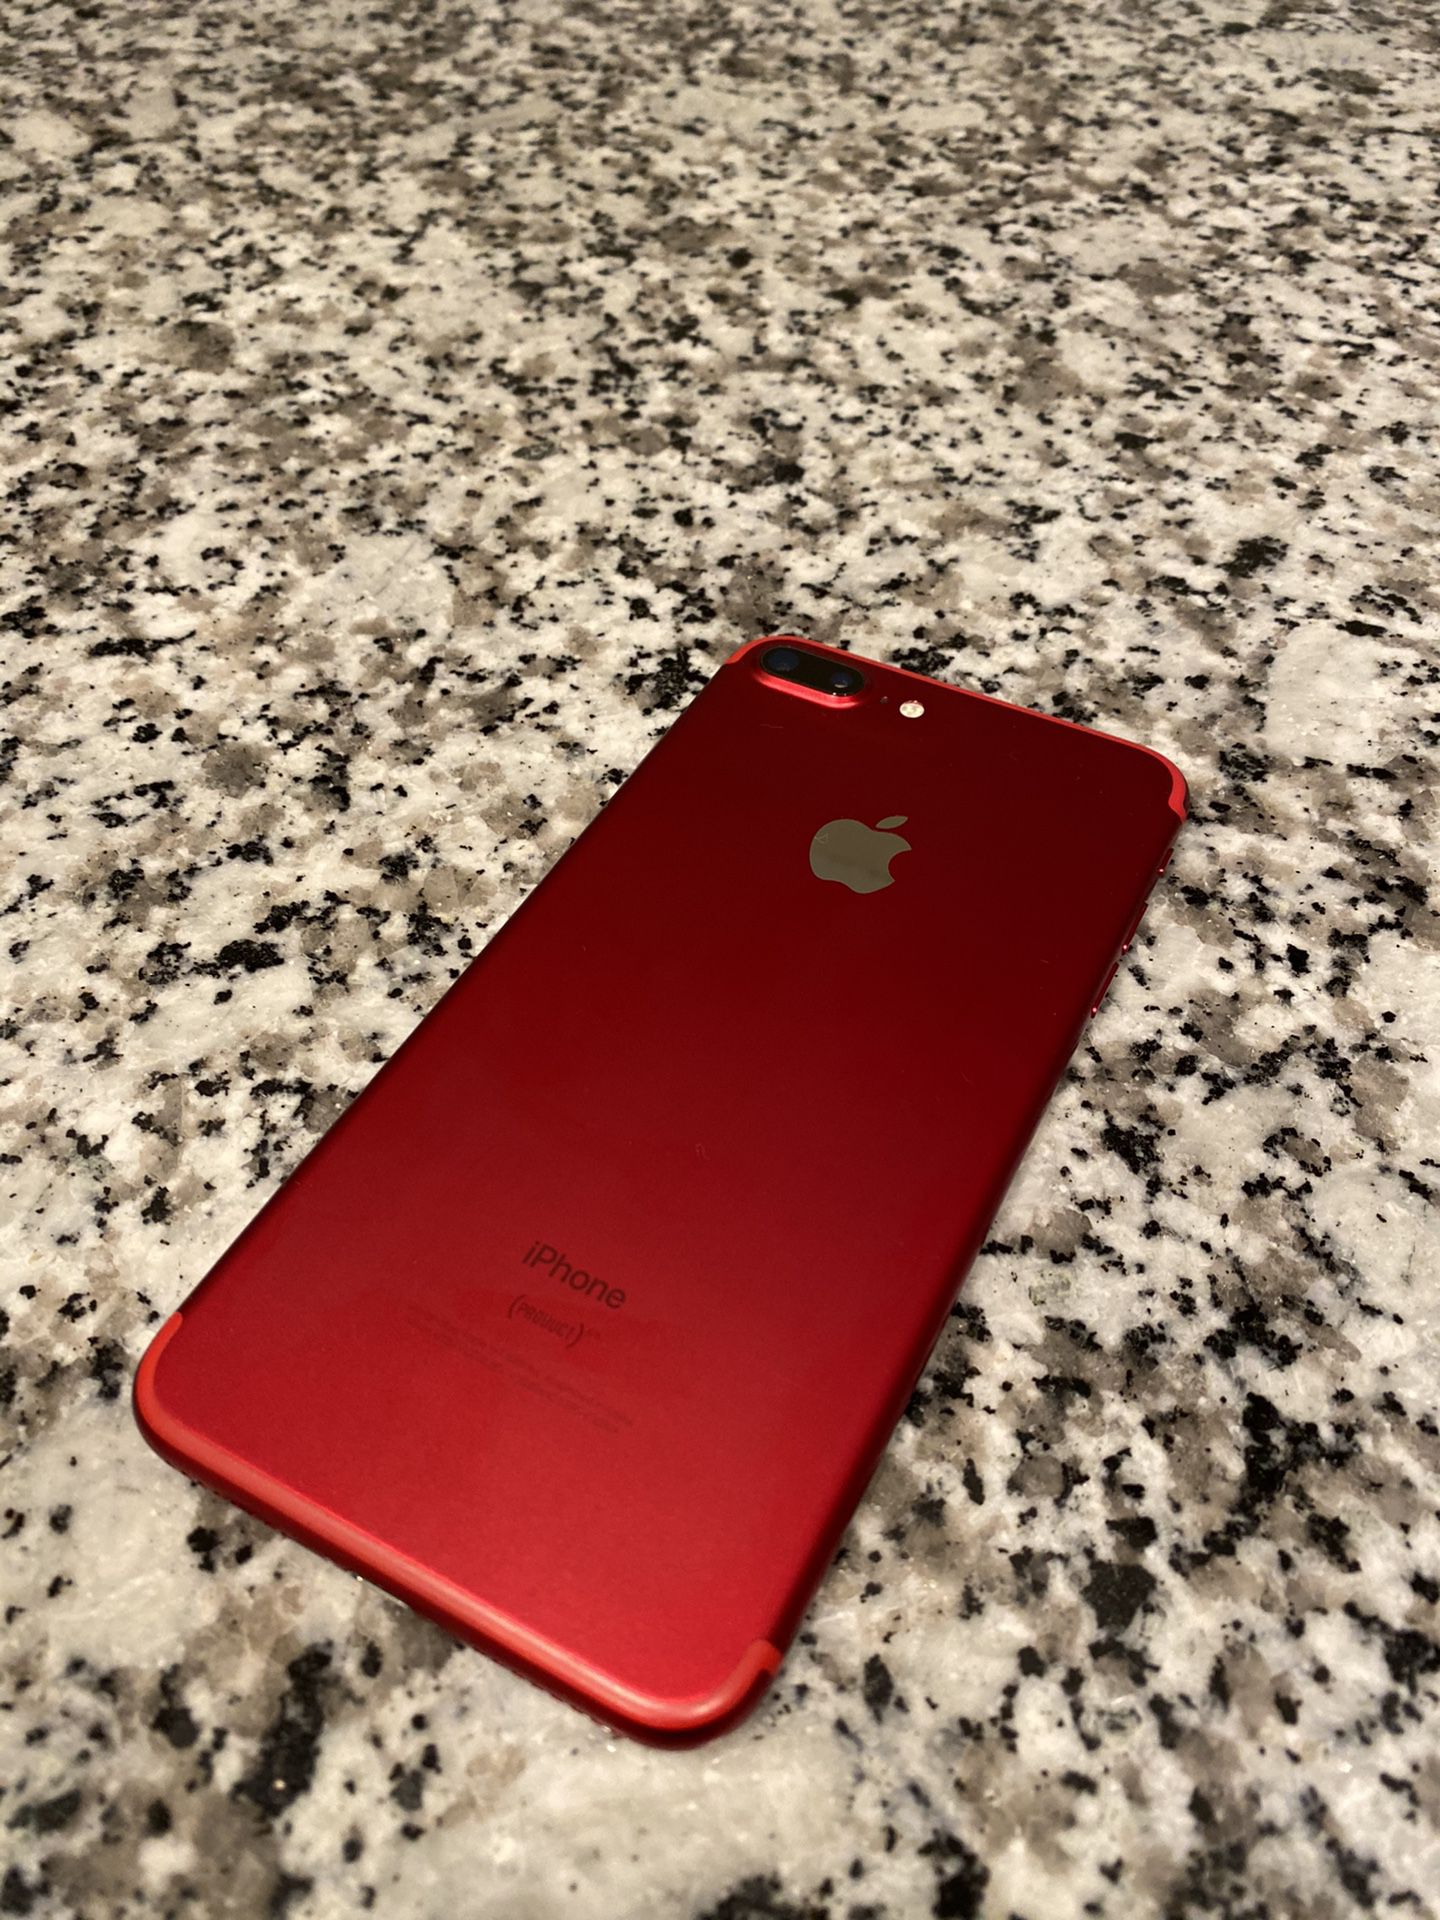 iPhone 7 Plus 128gb Factory Unlocked (product red)